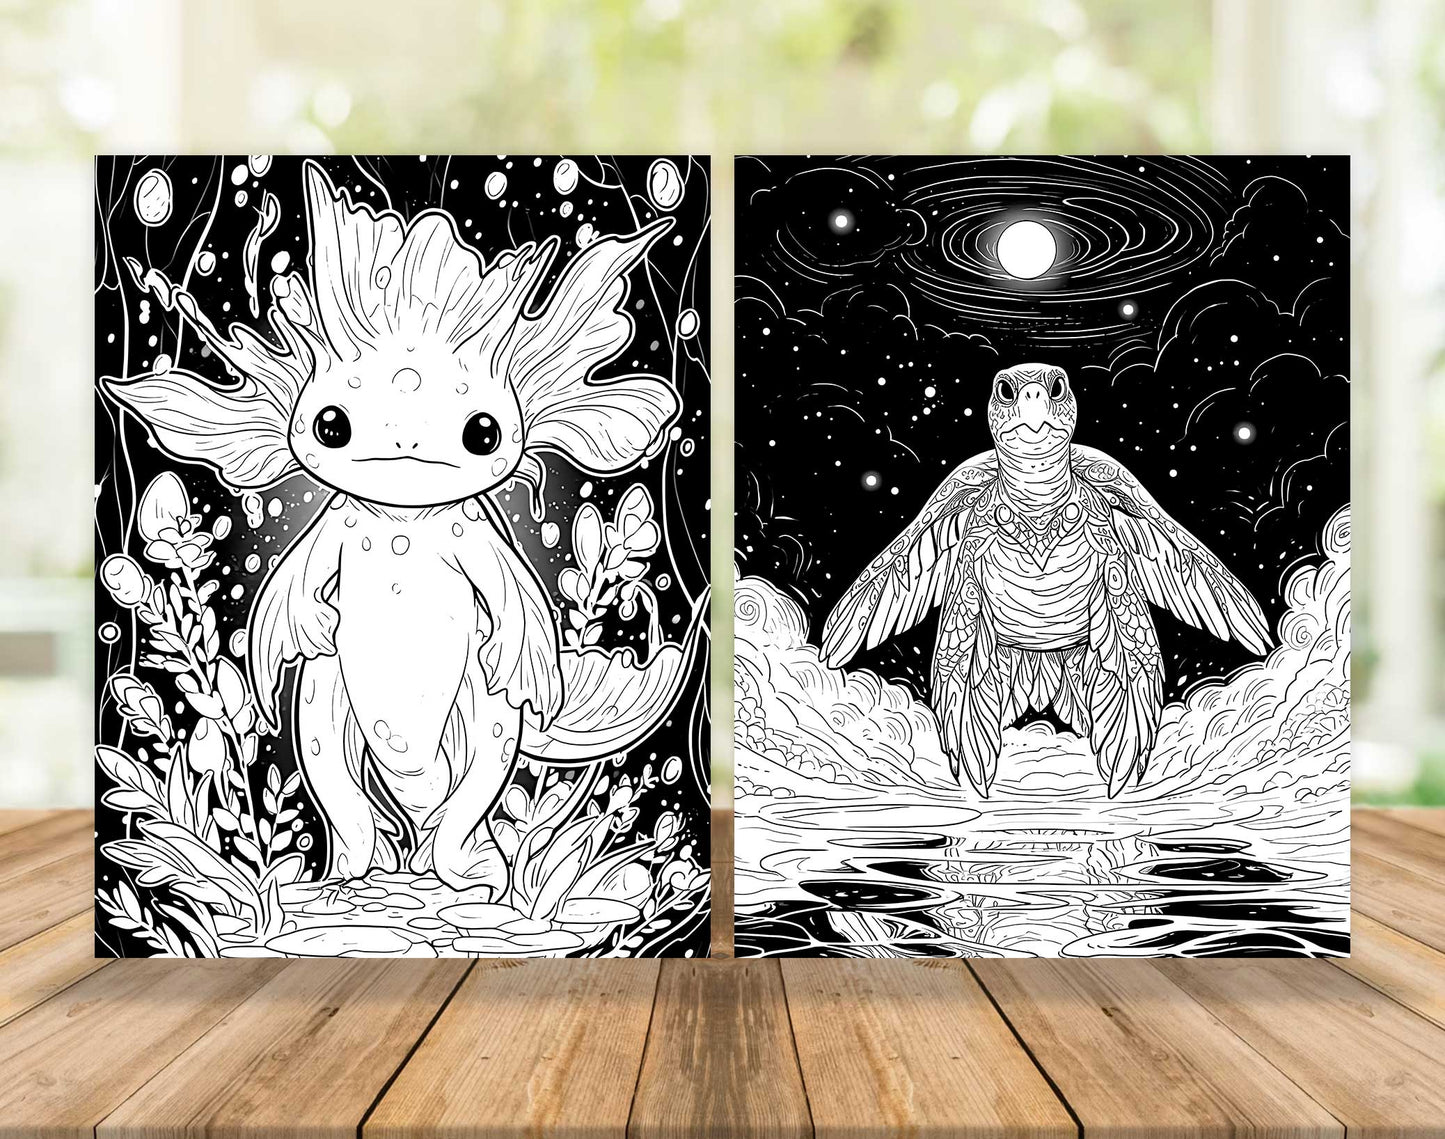 70 Fairy Animal Coloring Pages - Instant Download - Printable PDF